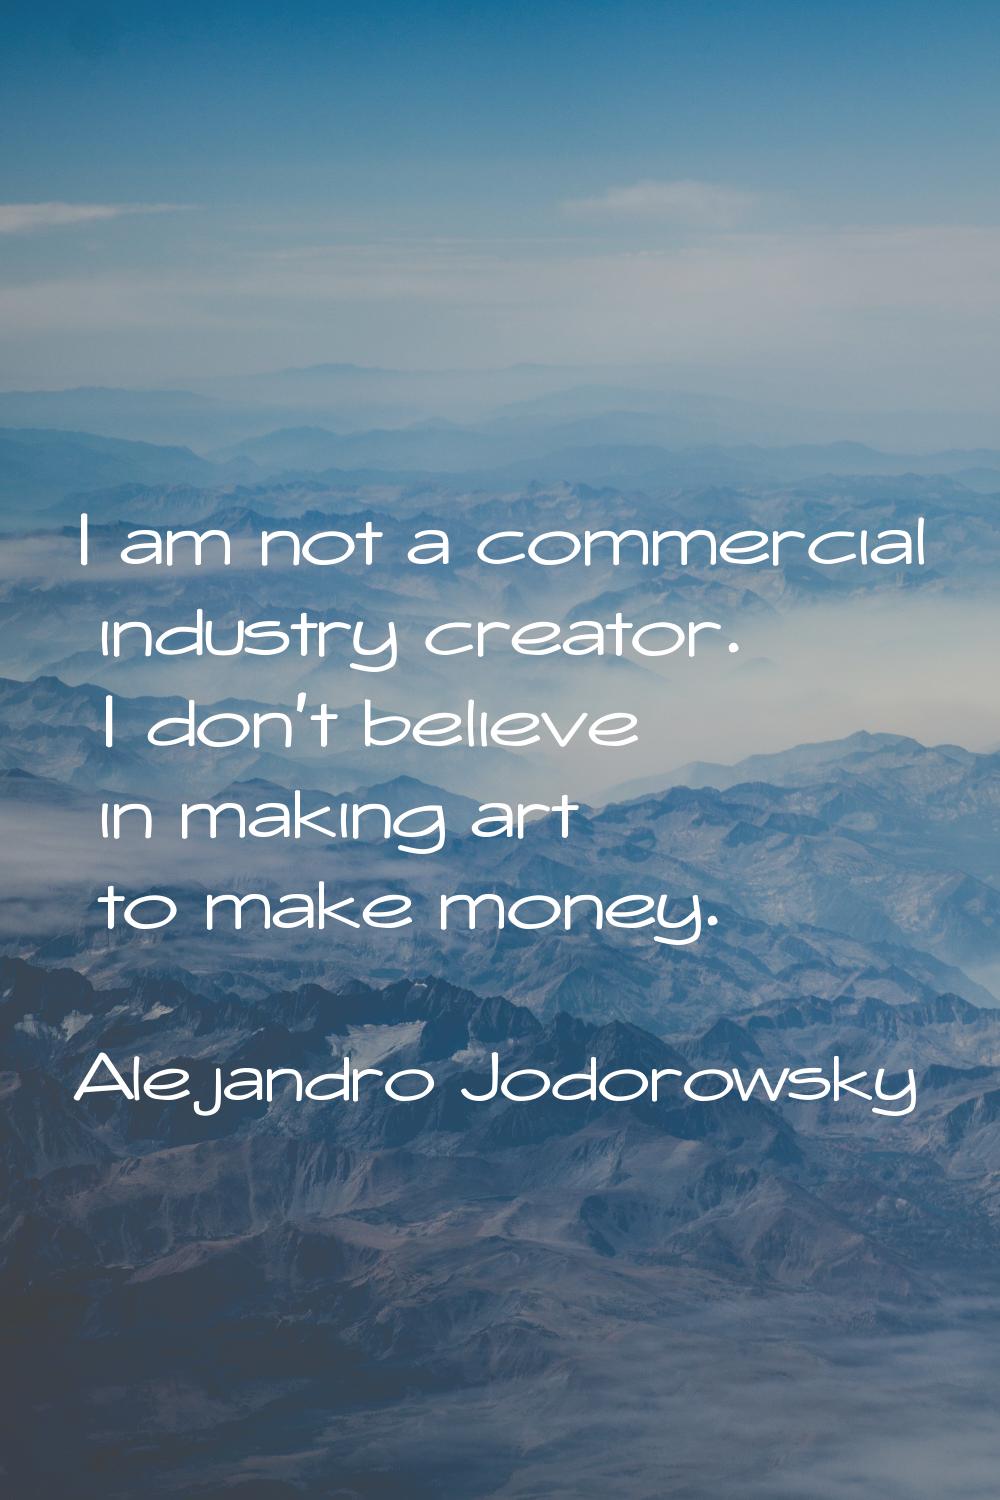 I am not a commercial industry creator. I don't believe in making art to make money.